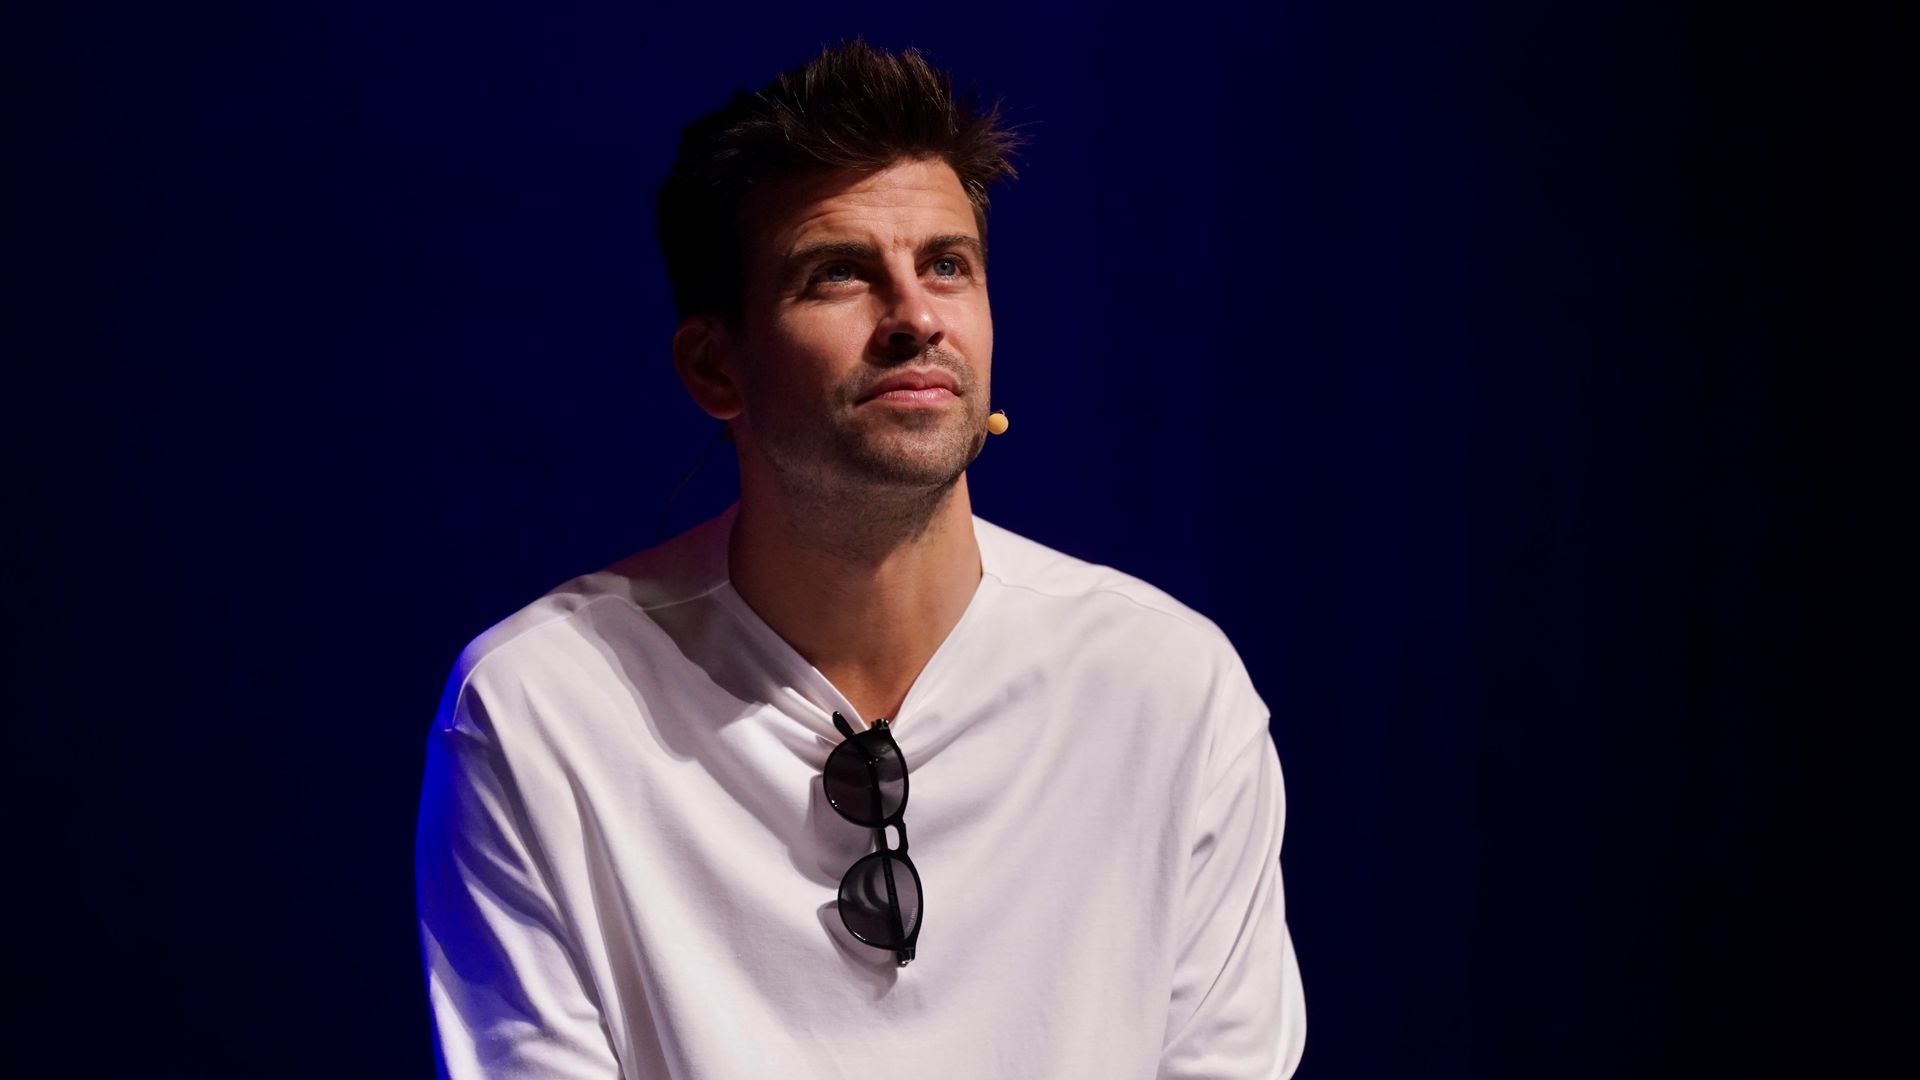 Pique on the future of football and why Man Utd must trust in youth